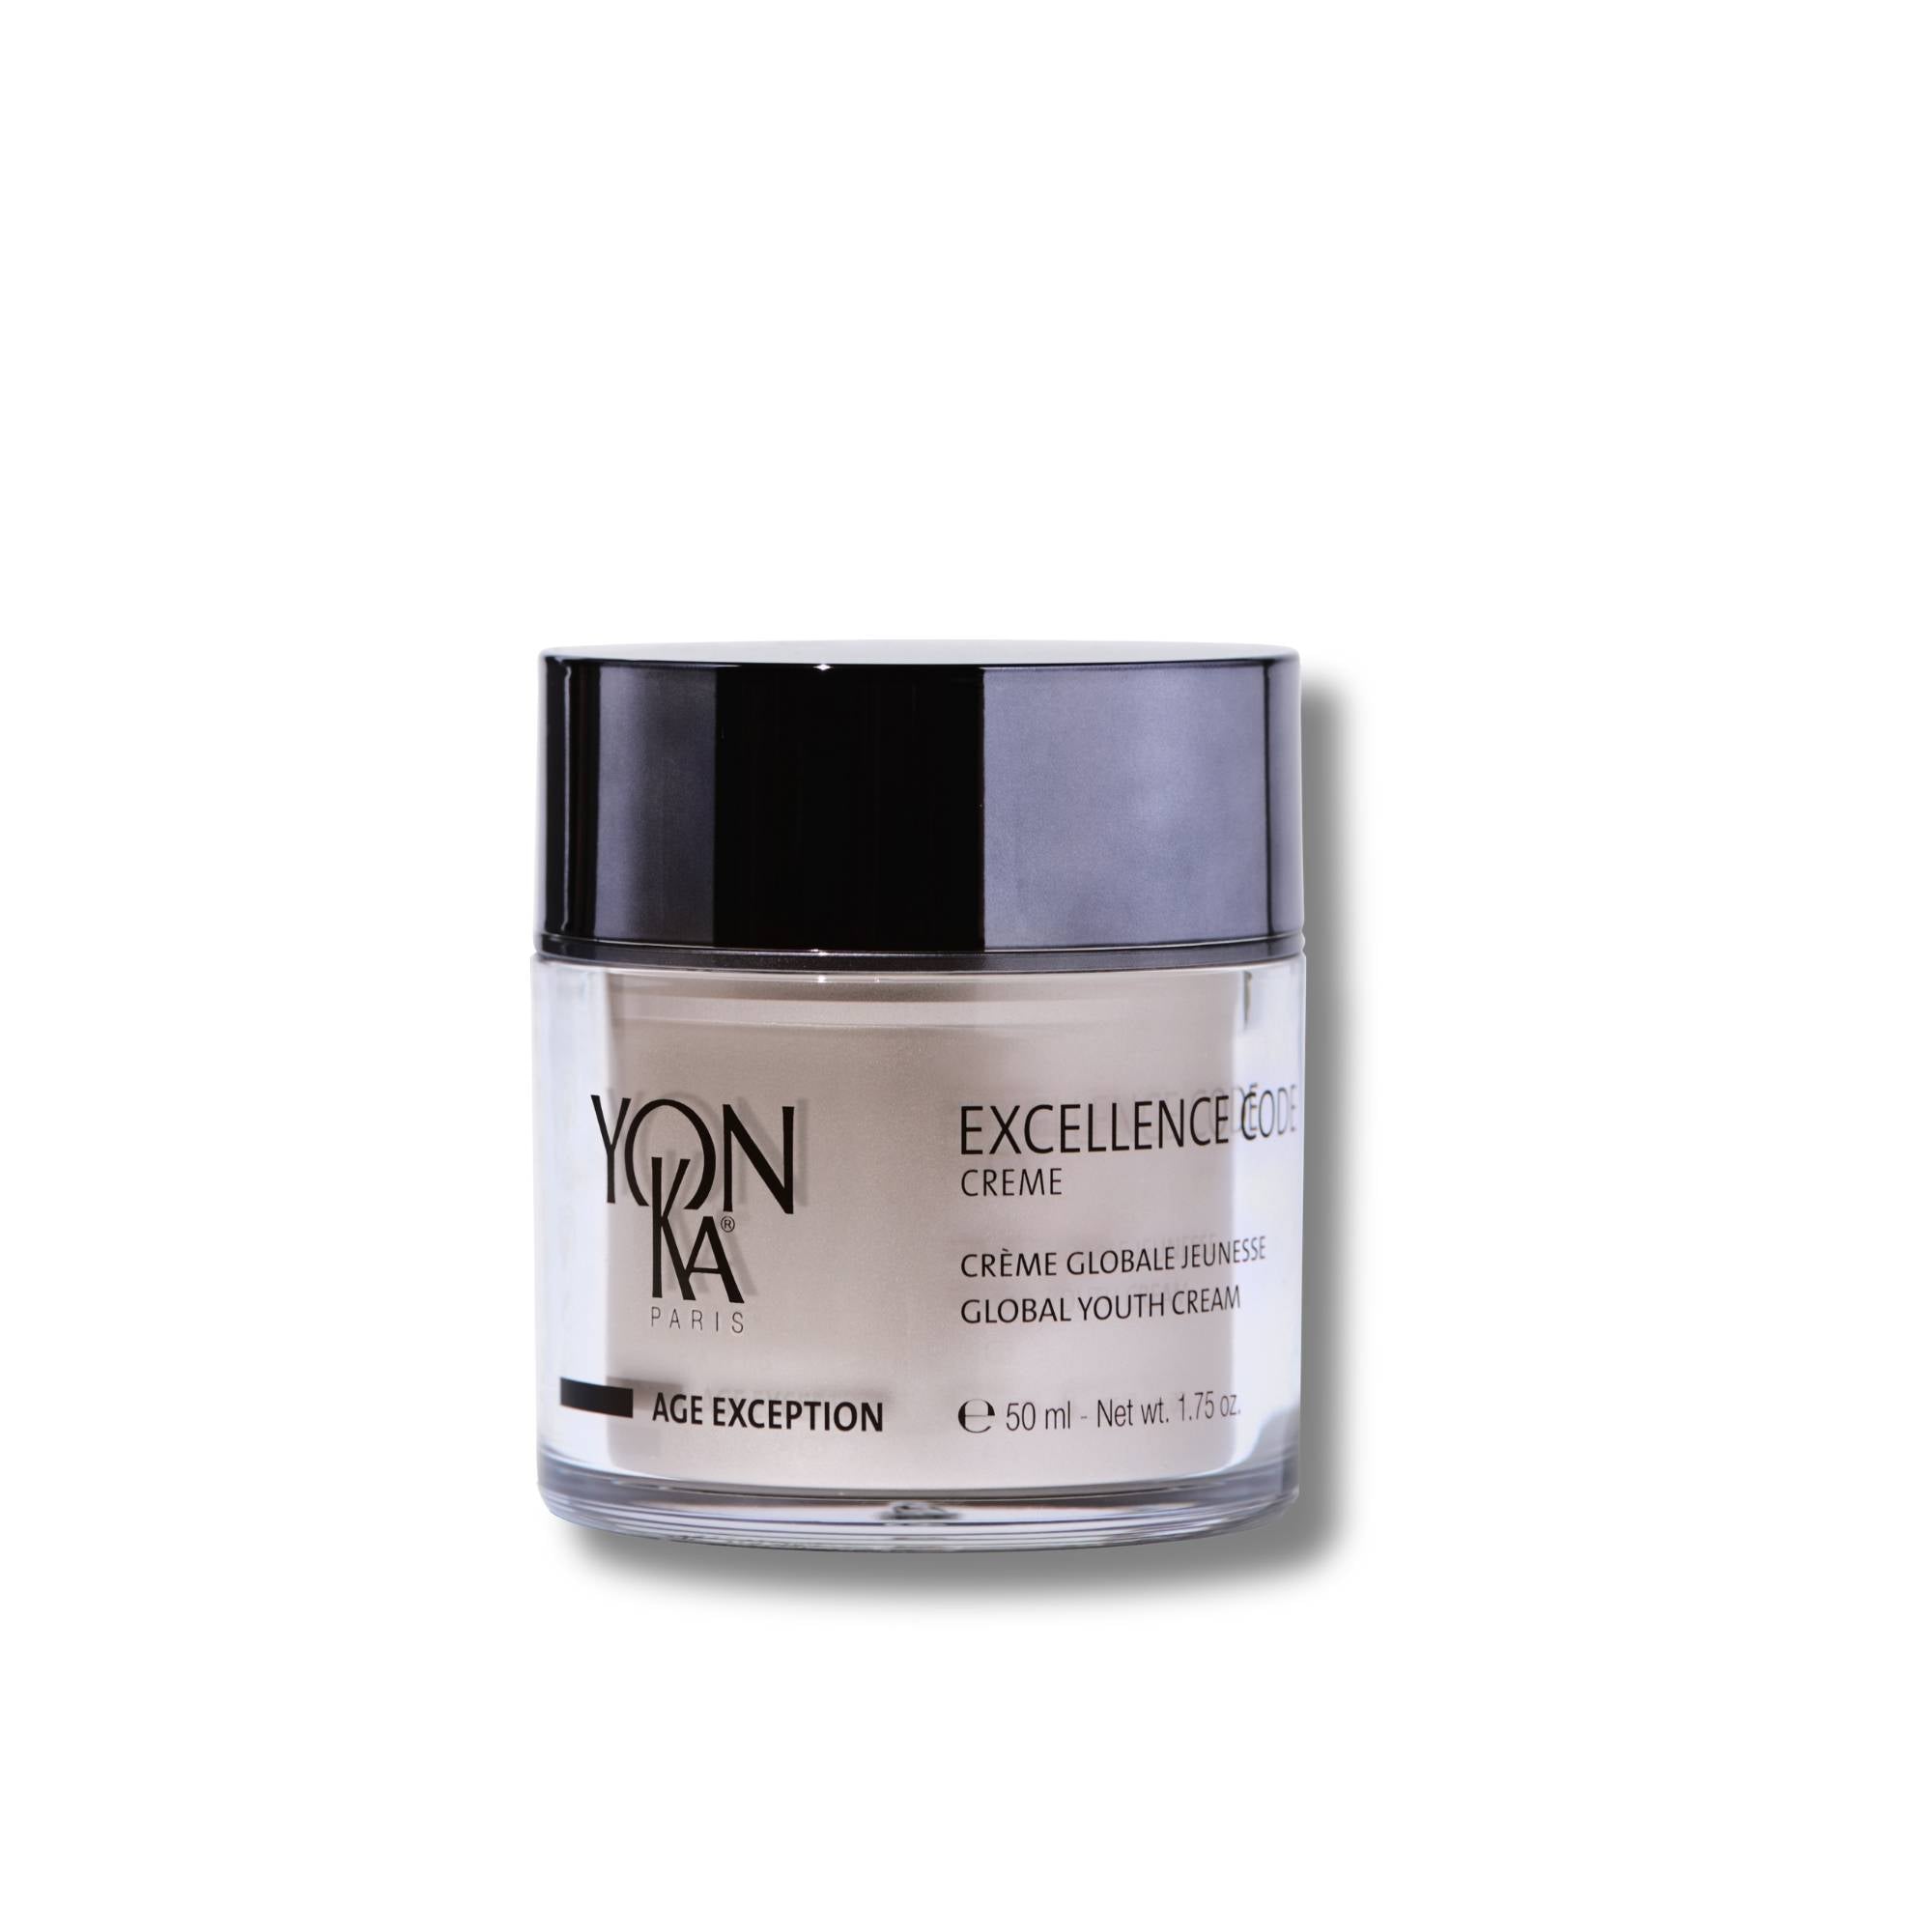 Excellence Code Crème – Anti-ageing